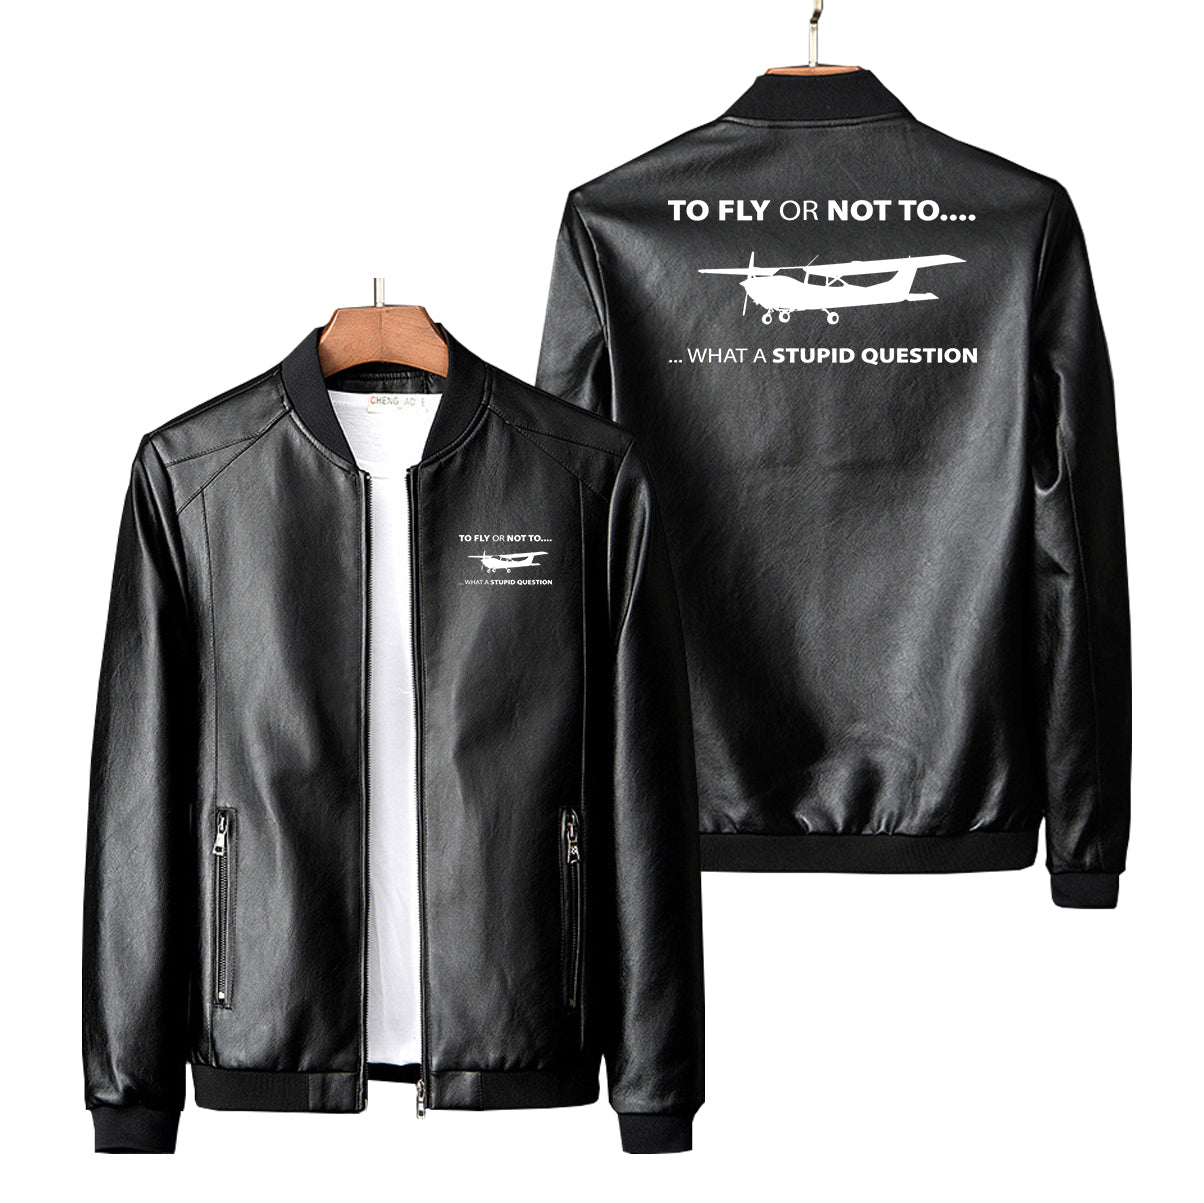 To Fly or Not To What a Stupid Question Designed PU Leather Jackets